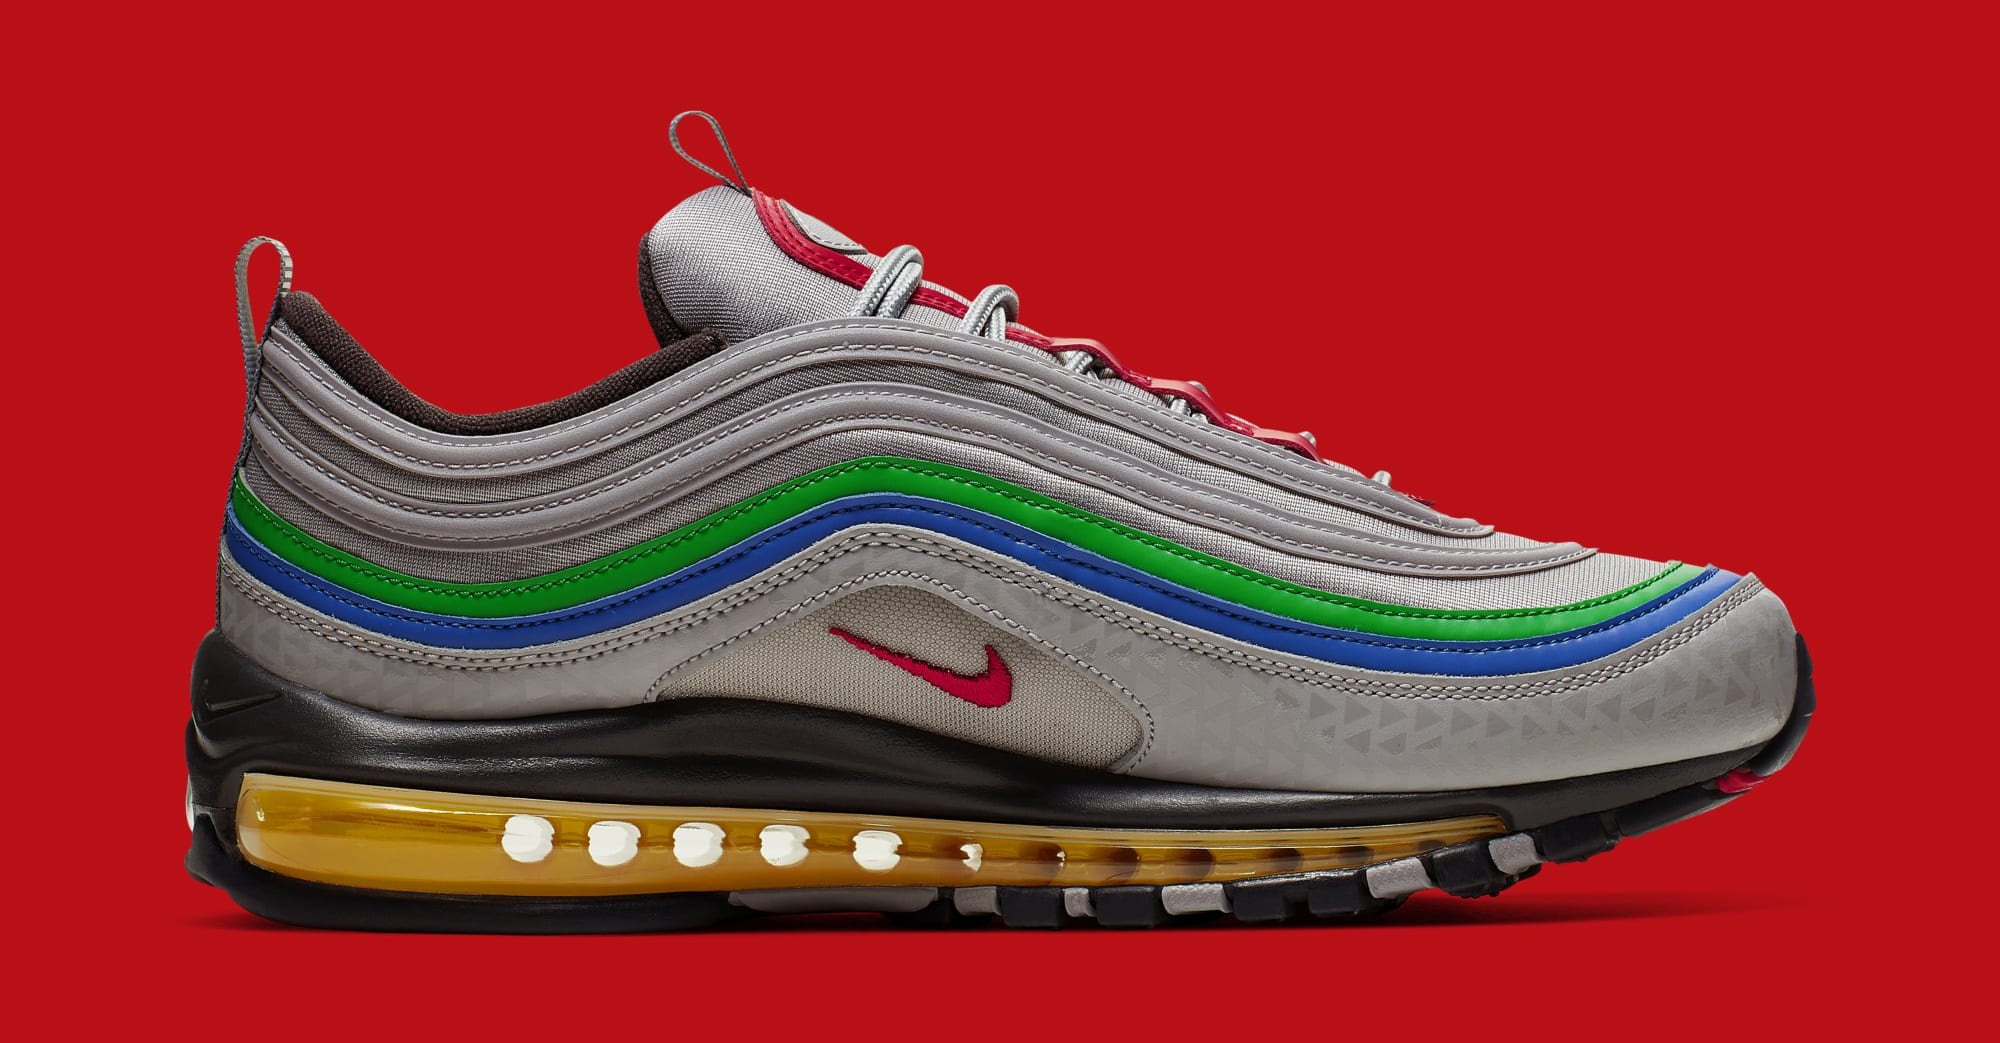 Nike Air Max 97 &quot;Nintendo 64&quot; Release Date Revealed: Official Images